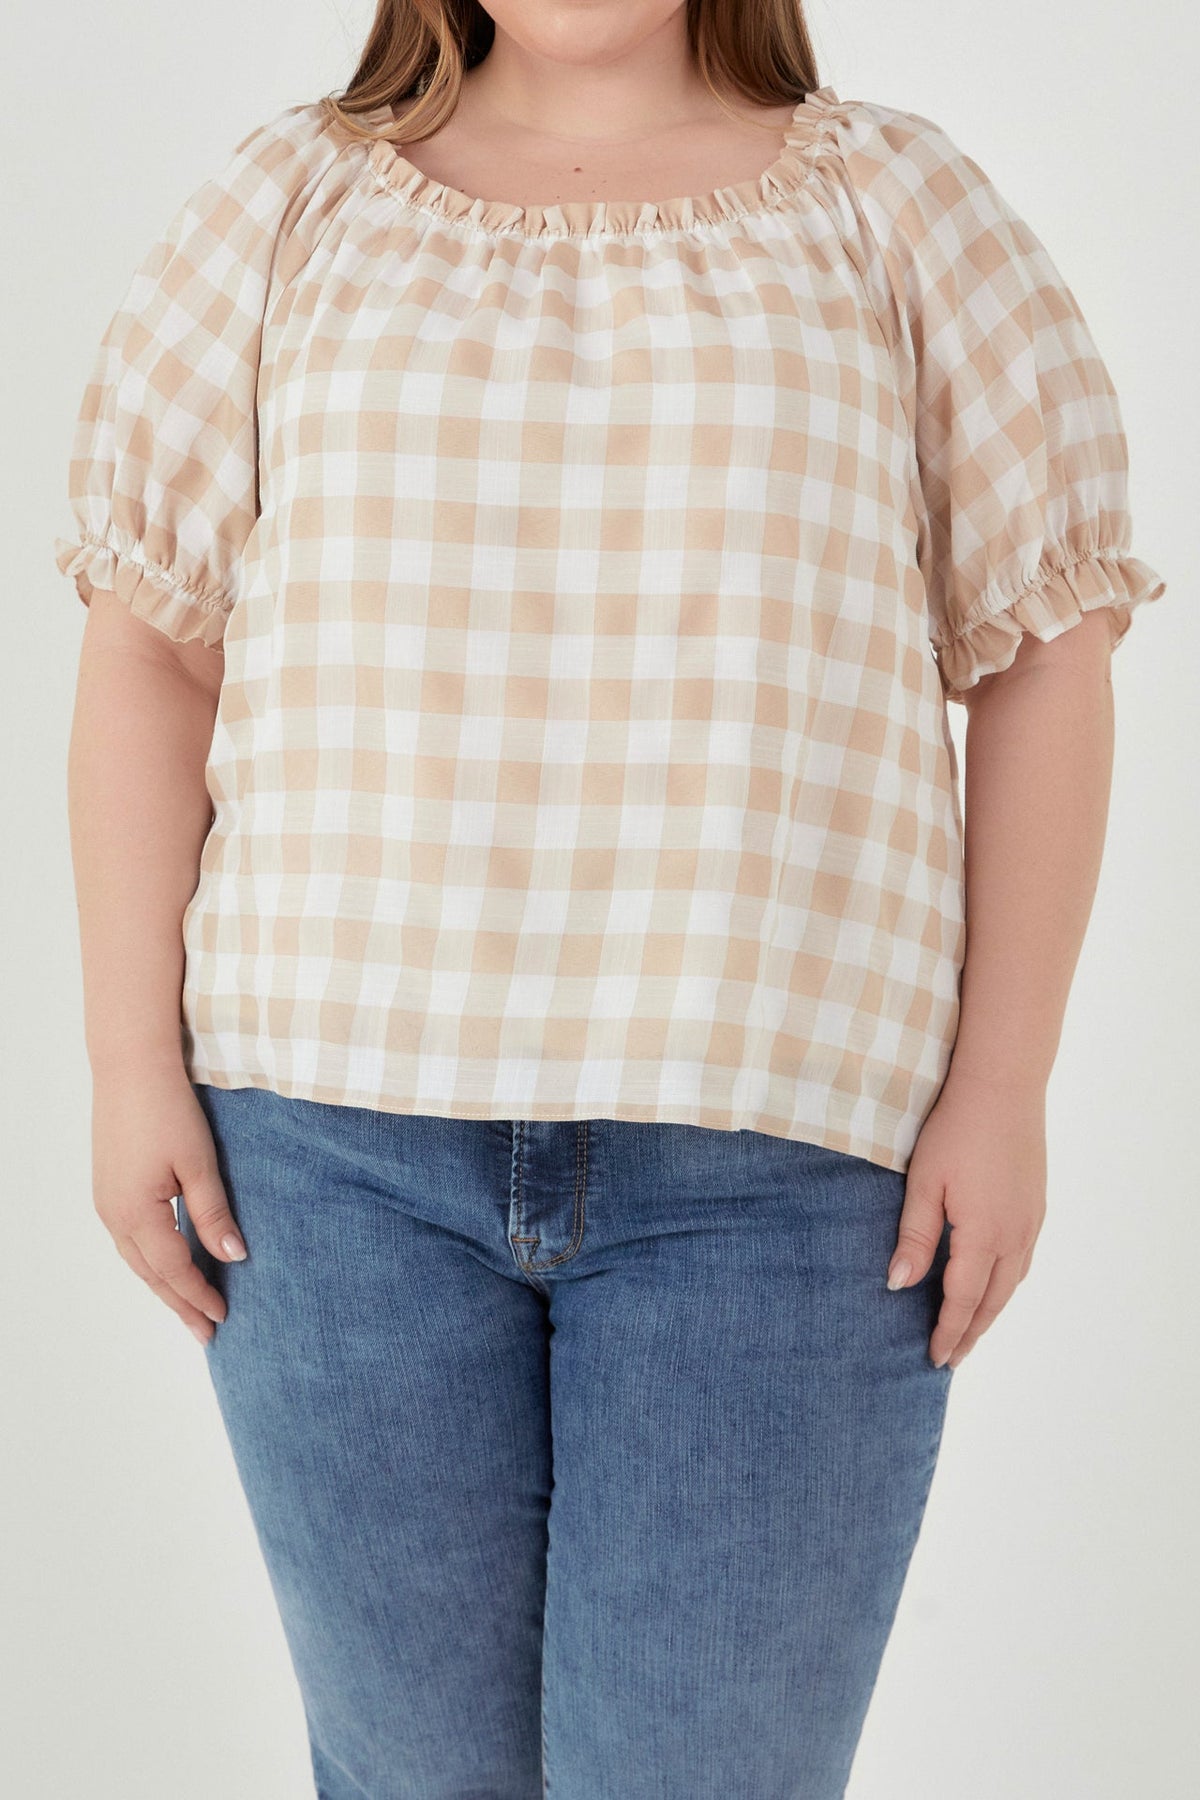 ENGLISH FACTORY - Gingham Top with Short Puff Sleeves - TOPS available at Objectrare